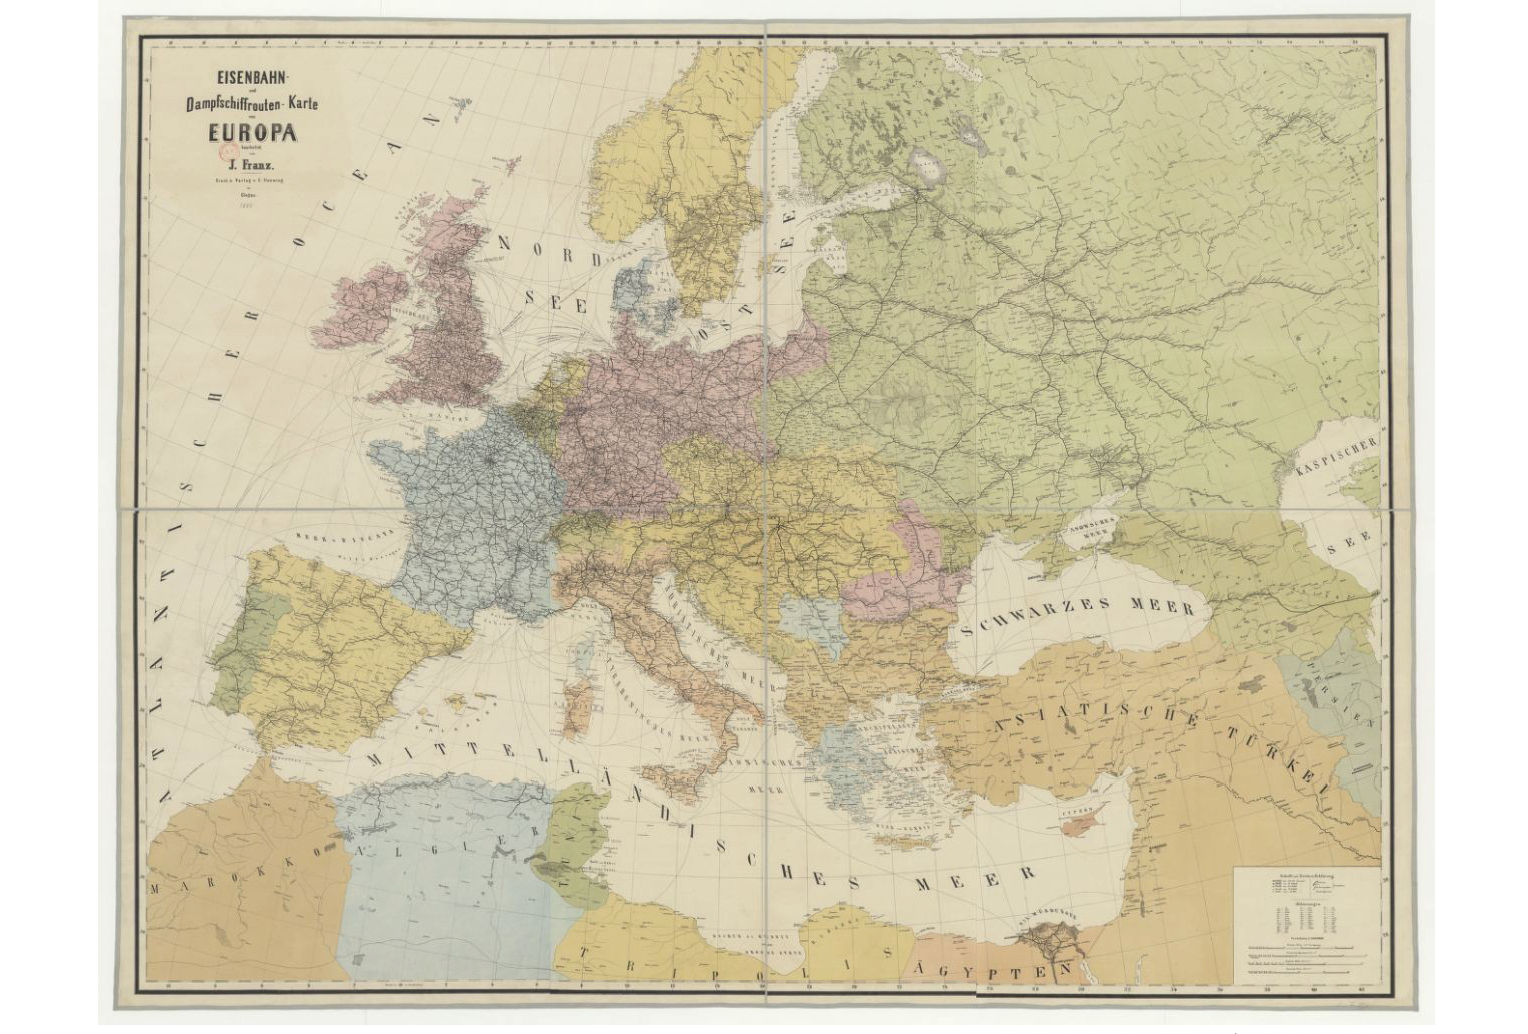 AÂ  map of railway and steamship routes in Europe from 1883.